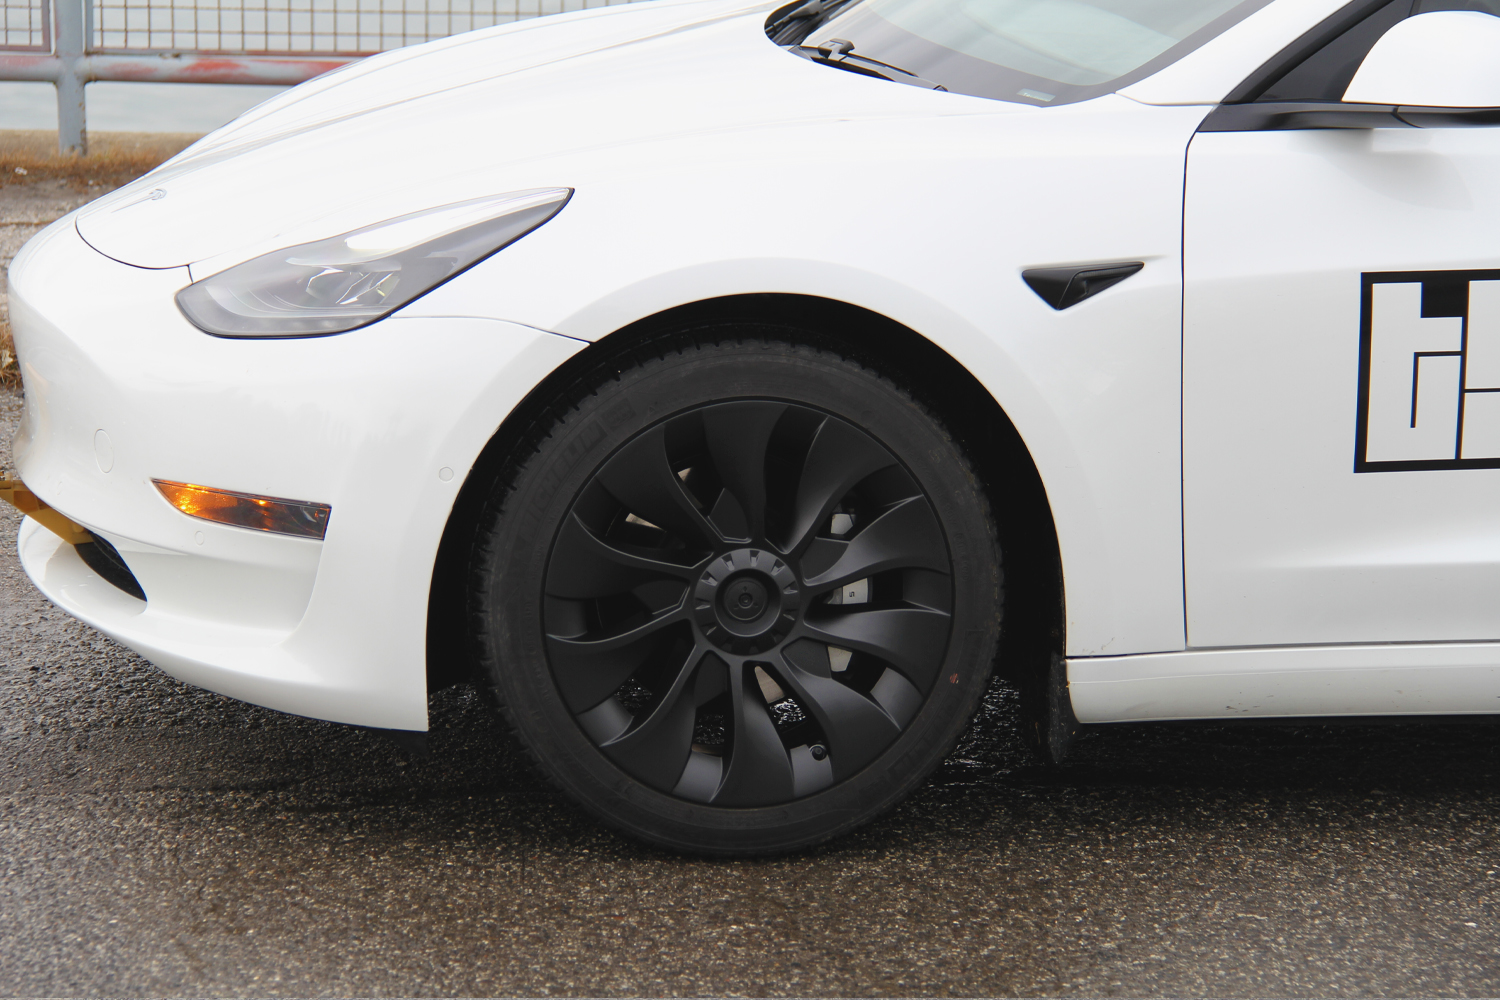 Model 3 Wheel Covers - Induction